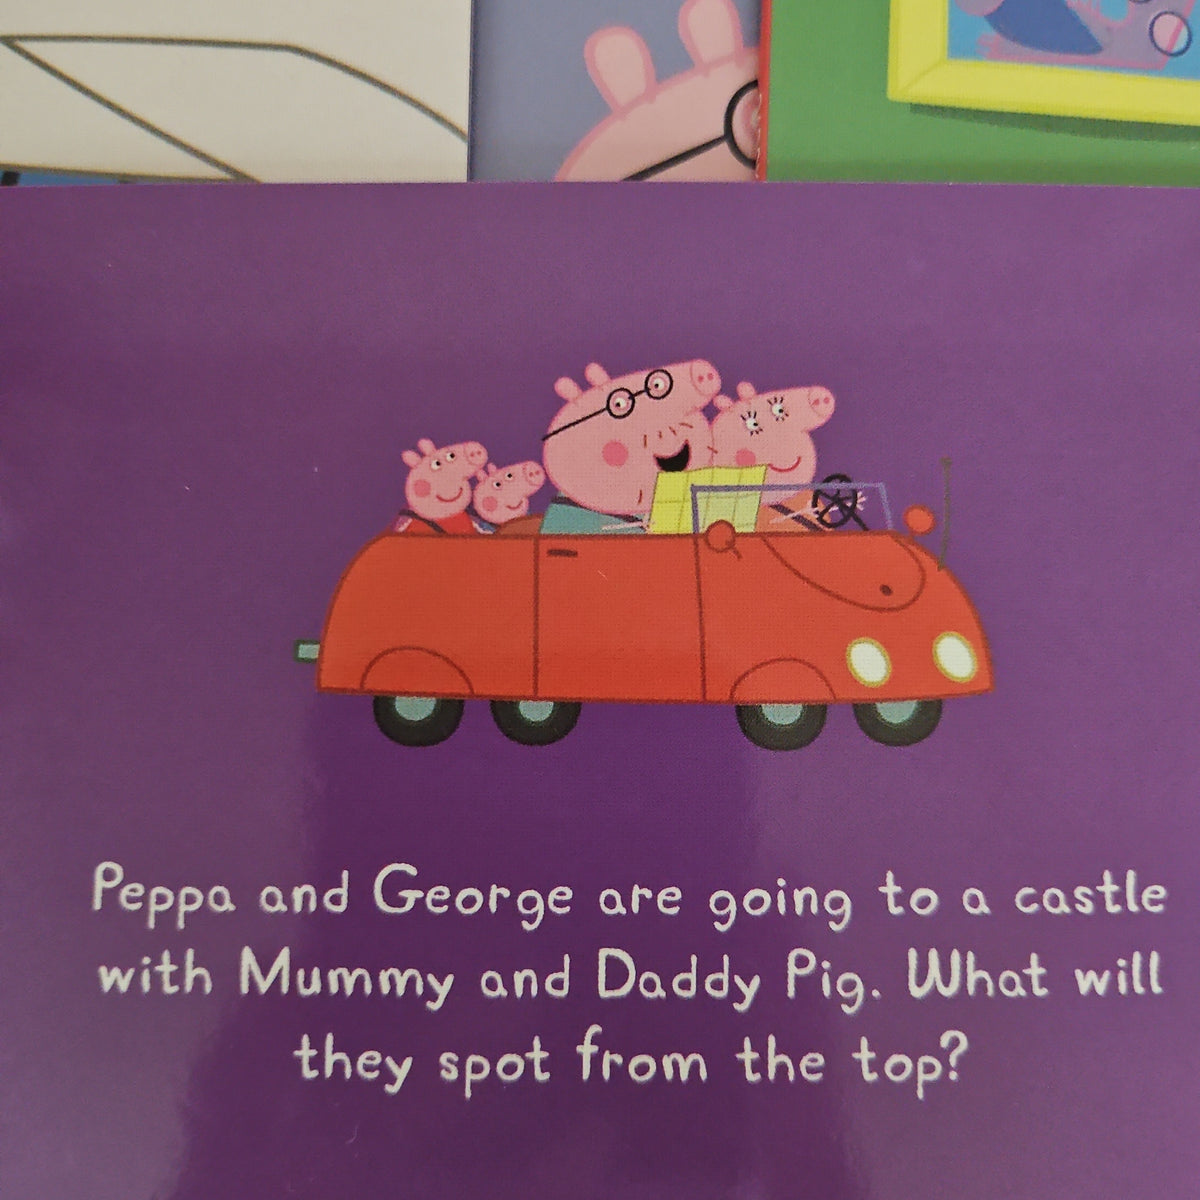 The Amazing Peppa Pig Collection:The Castle